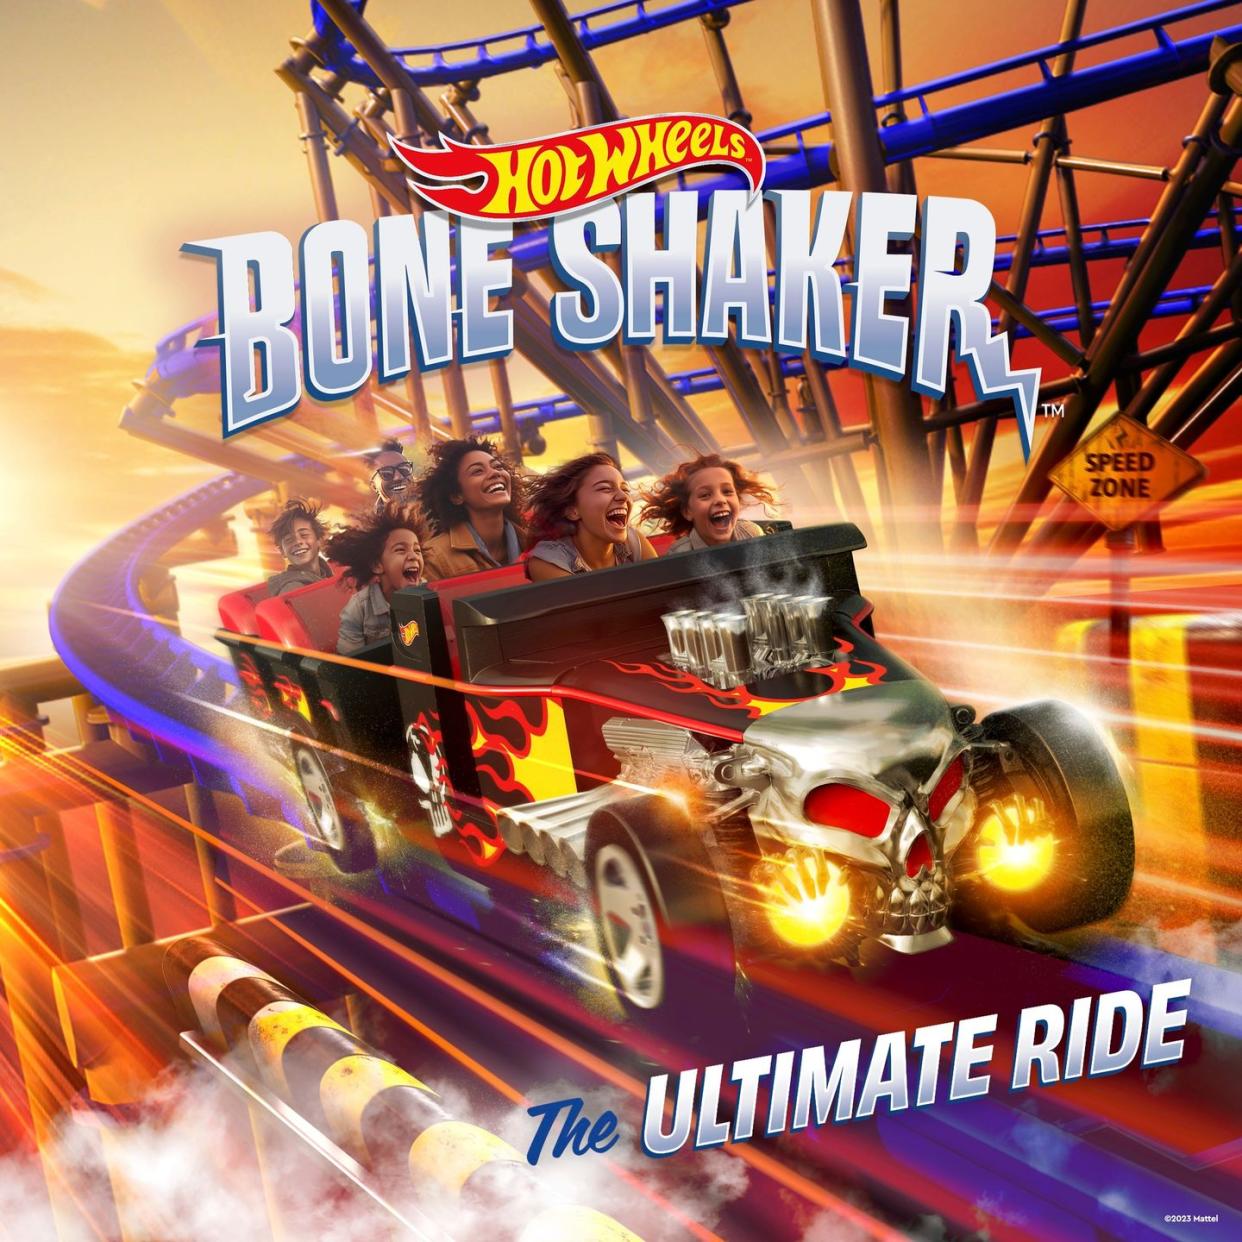 a rendering of hot wheels bone shaker the ultimate ride, one of the thrill rides at mattel adventure park